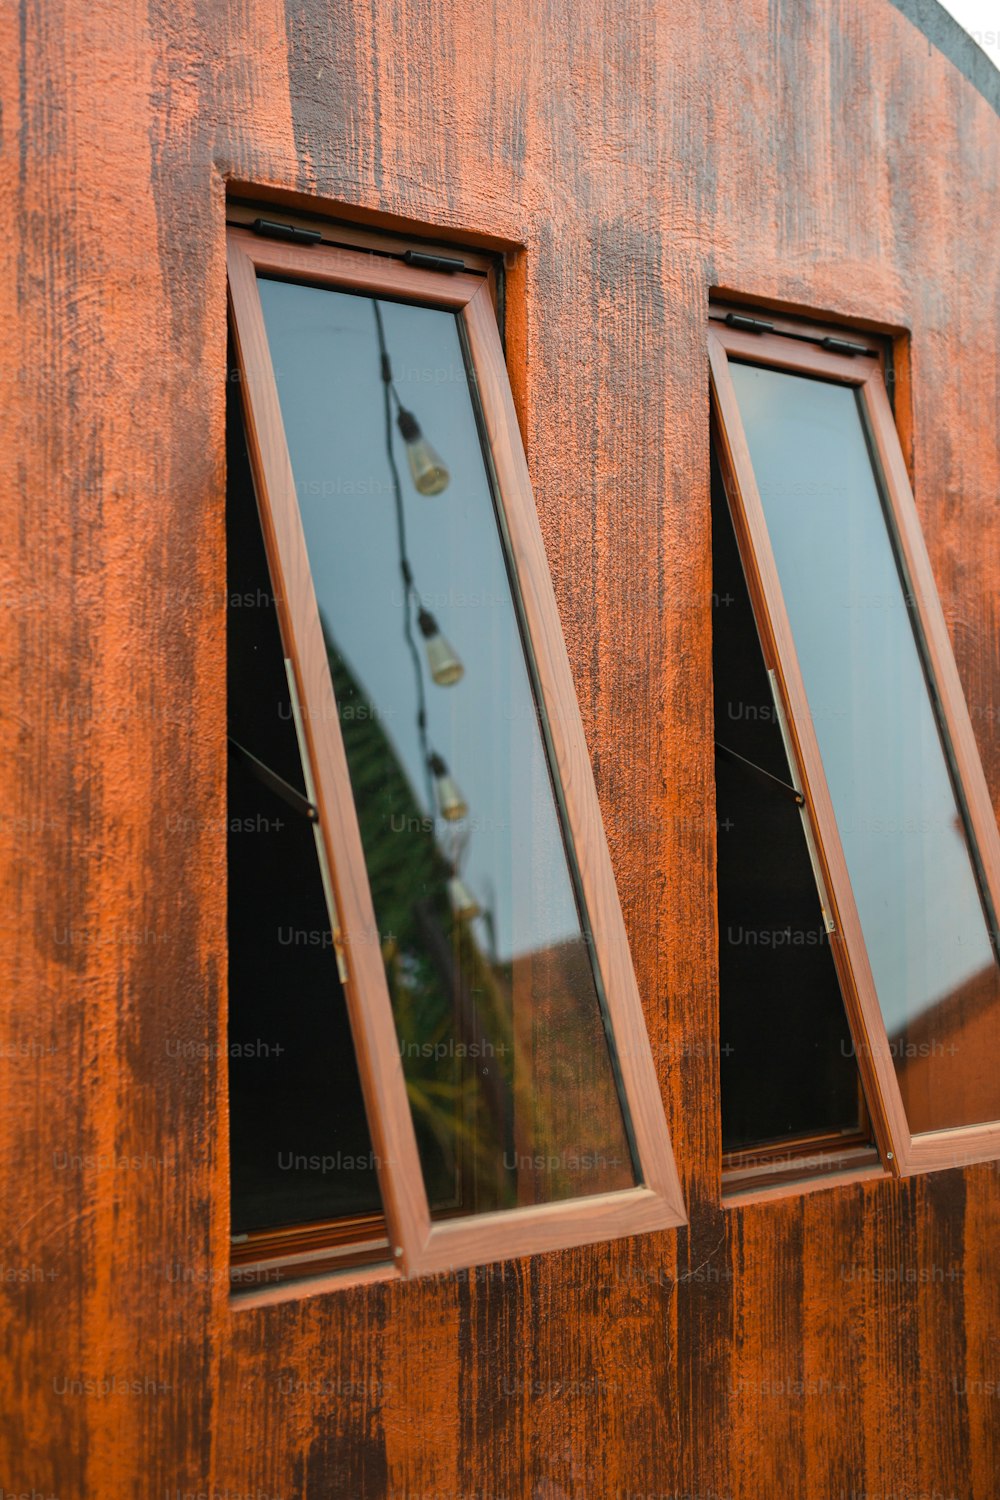 three windows on the side of a wooden building